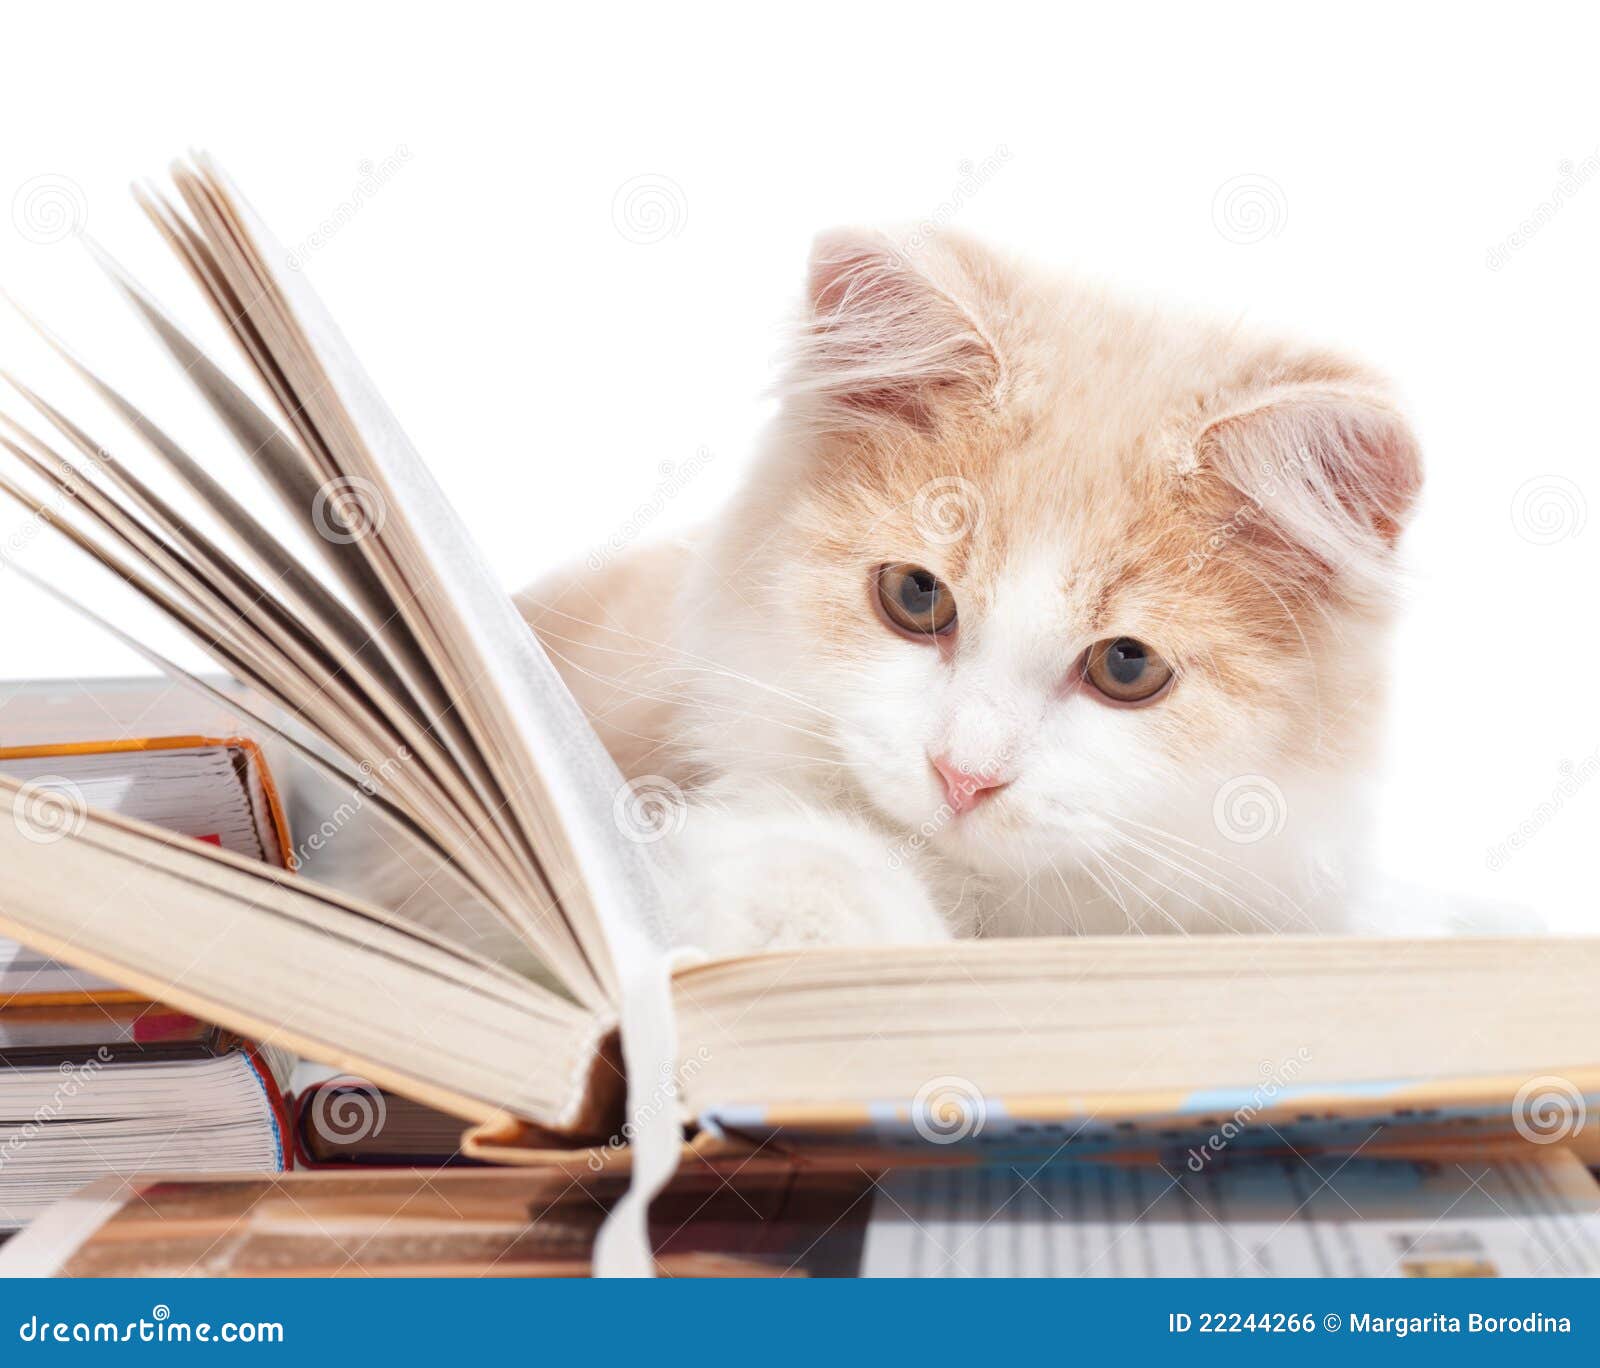 Little Cat Read A Book Royalty Free Stock Image - Image: 22244266